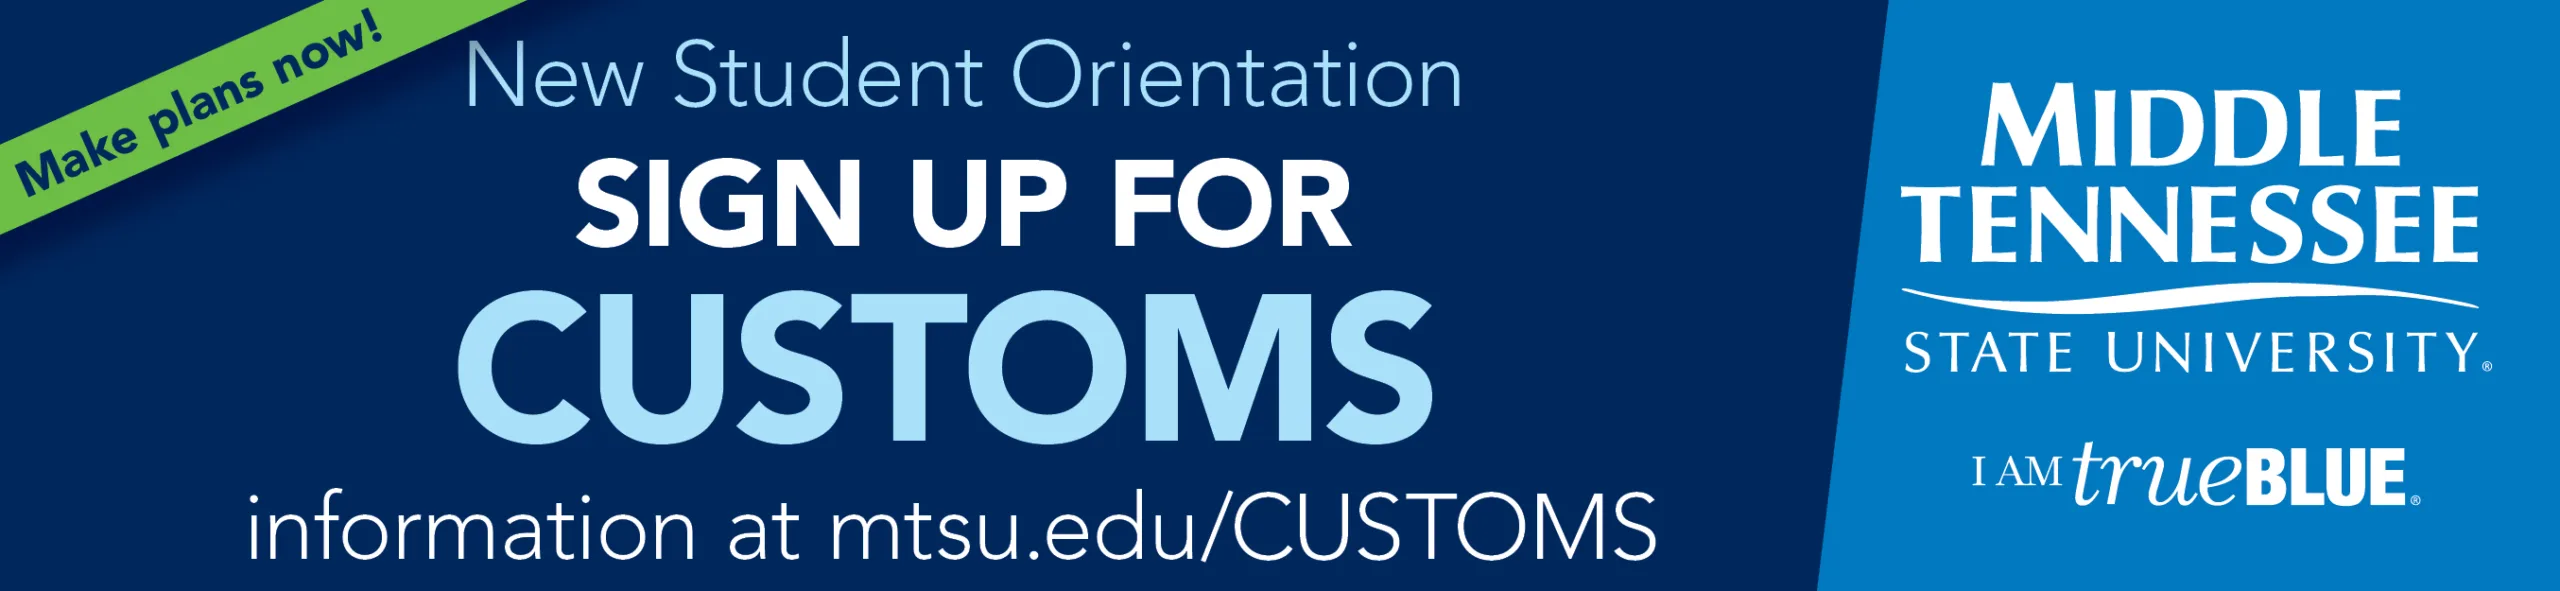 New Student Orientation: Sign up for CUSTOMS. Information at mtsu.edu/CUSTOMS. Make plans now!